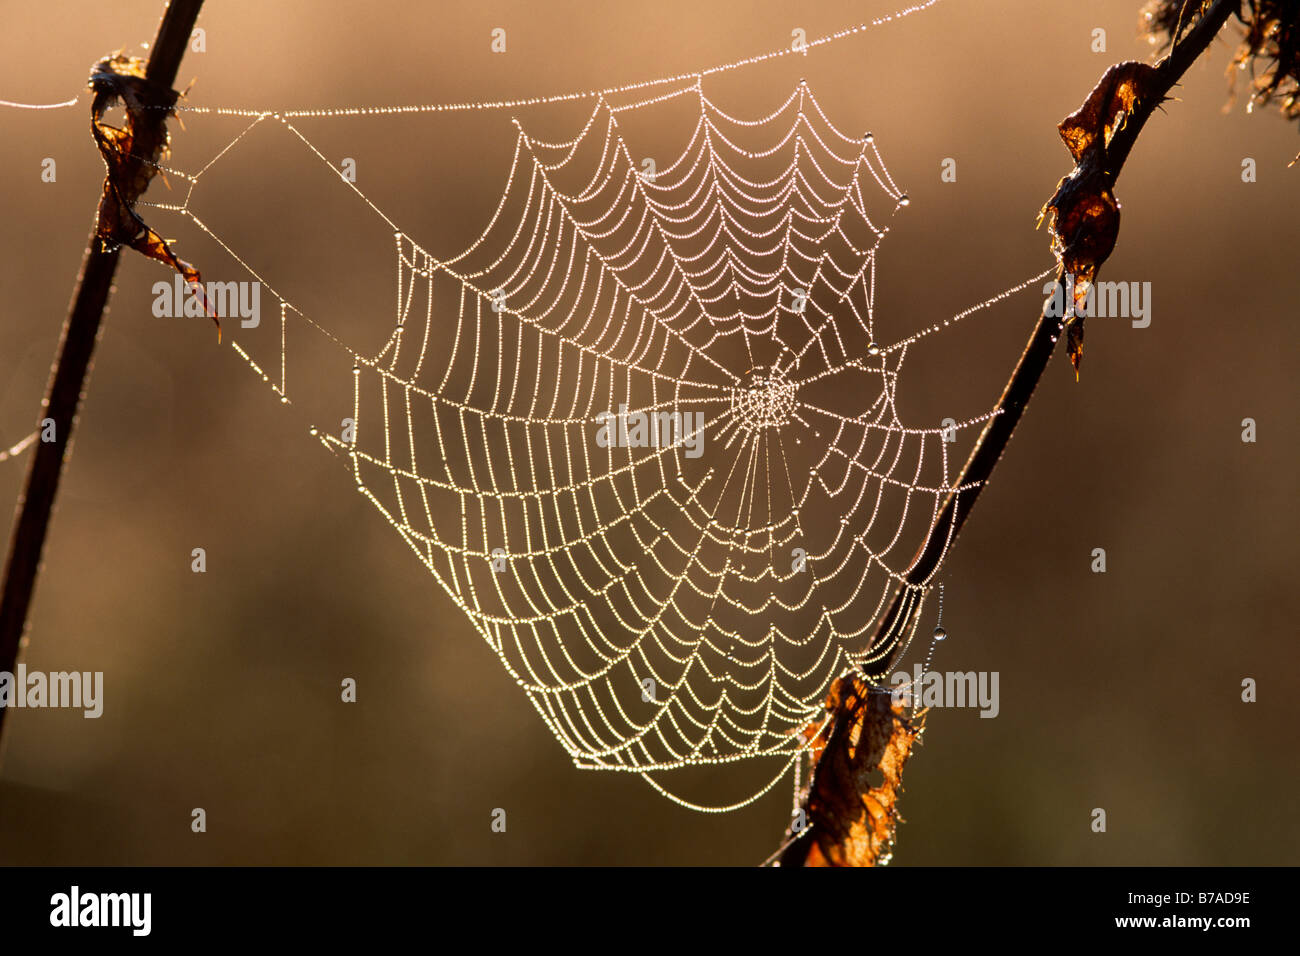 Spiders web in pearly morning dew, North Tyrol, Austria, Europe Stock Photo